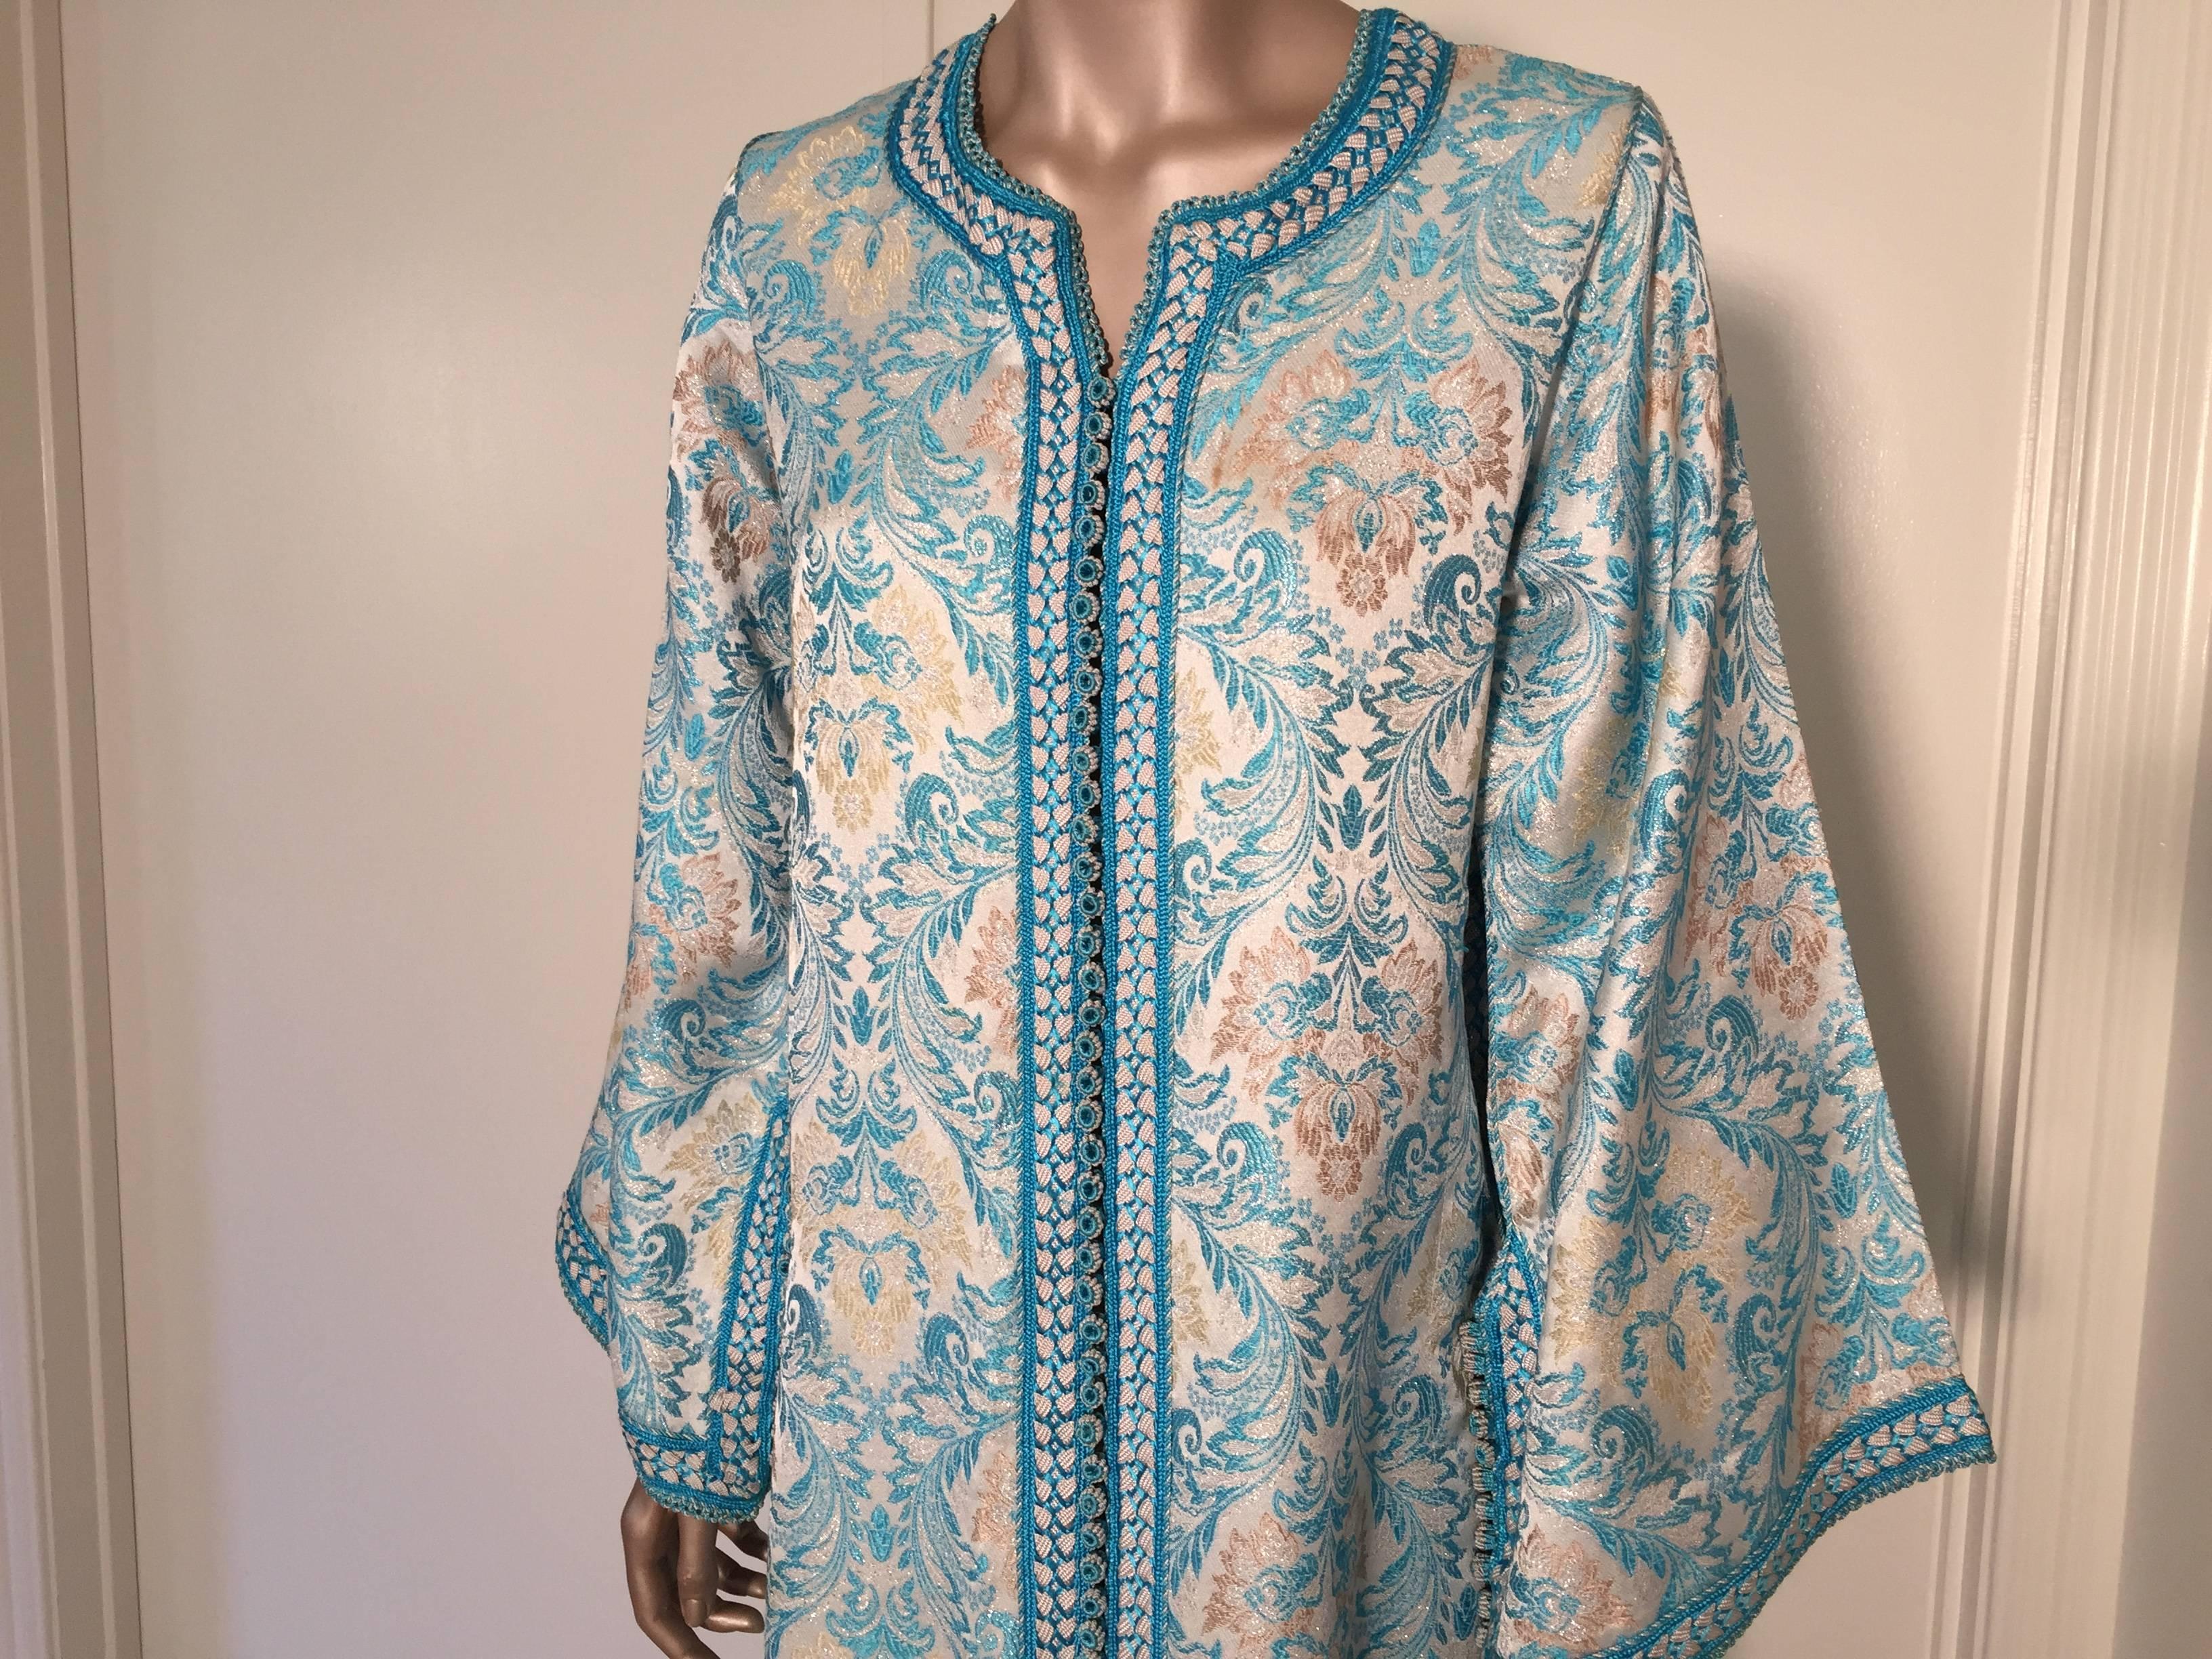 Elegant Moroccan caftan turquoise lame metallic embroidered with gold threads,
circa 1970s.
This long maxi dress kaftan is embroidered and embellished entirely by hand.
One of a kind evening Moroccan Middle Eastern gown.
The kaftan features a